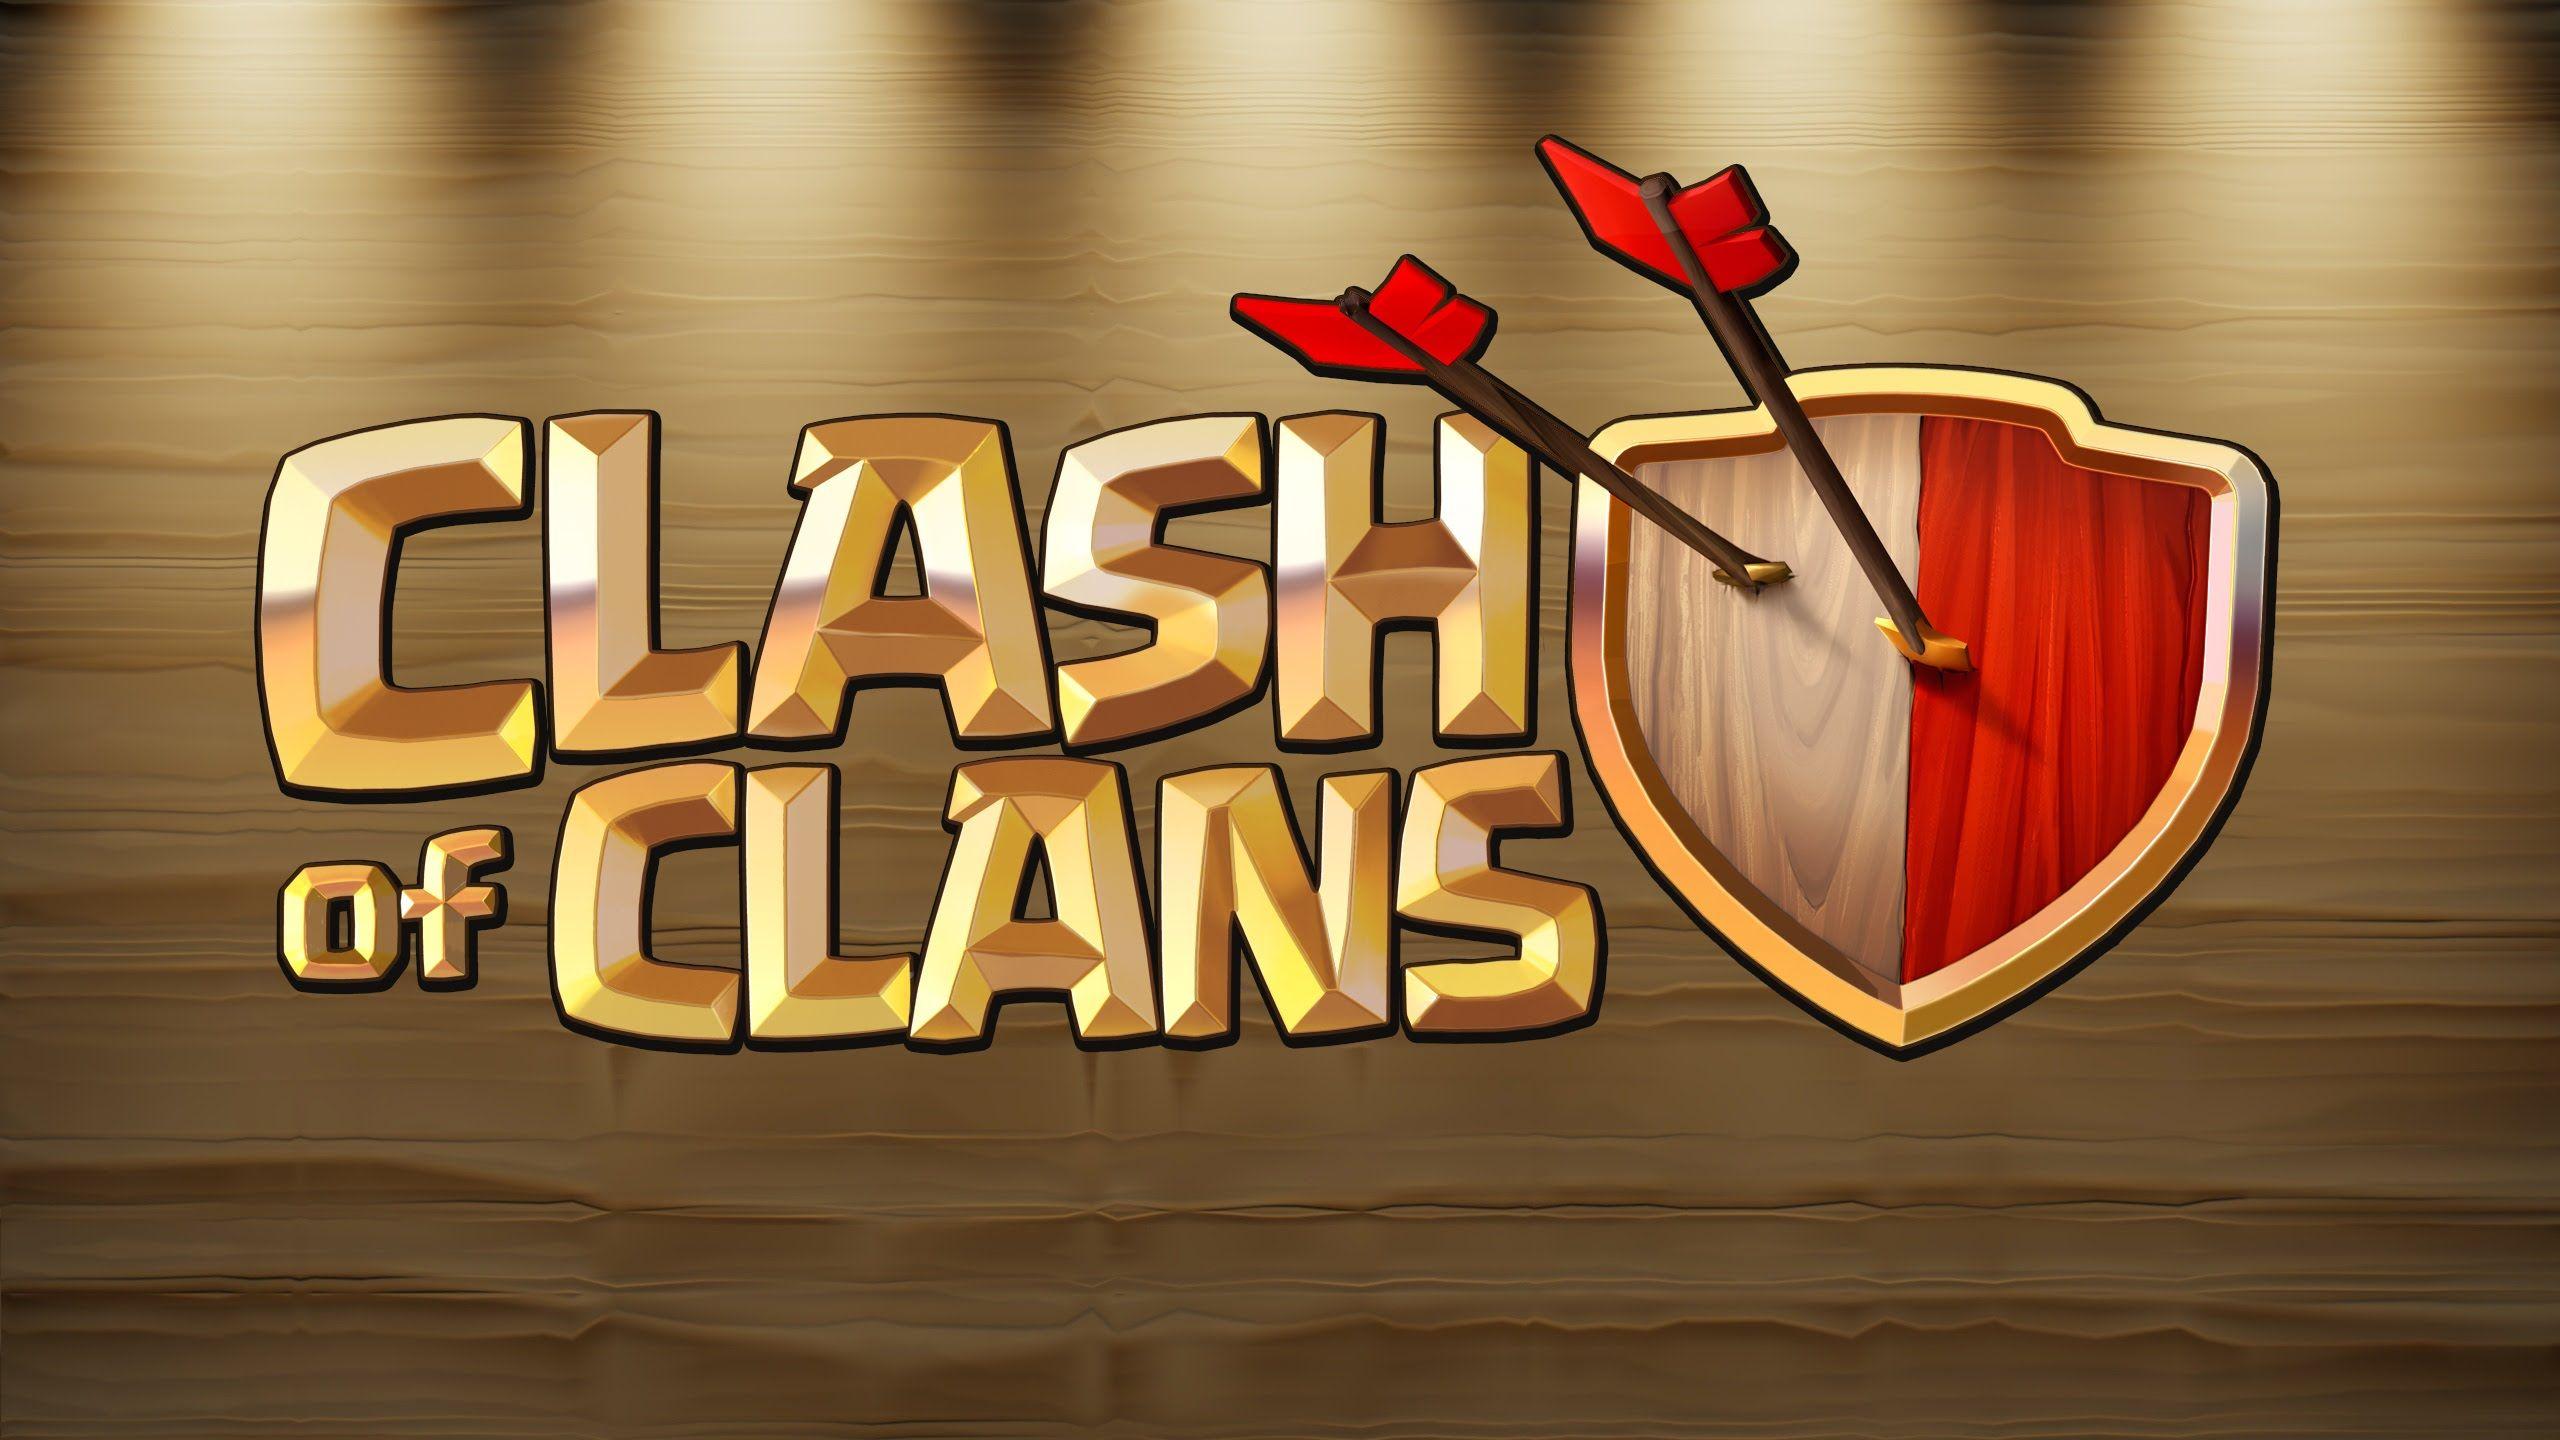 Clash of Clans Logo - Clash of Clans Logo Background Wallpaper